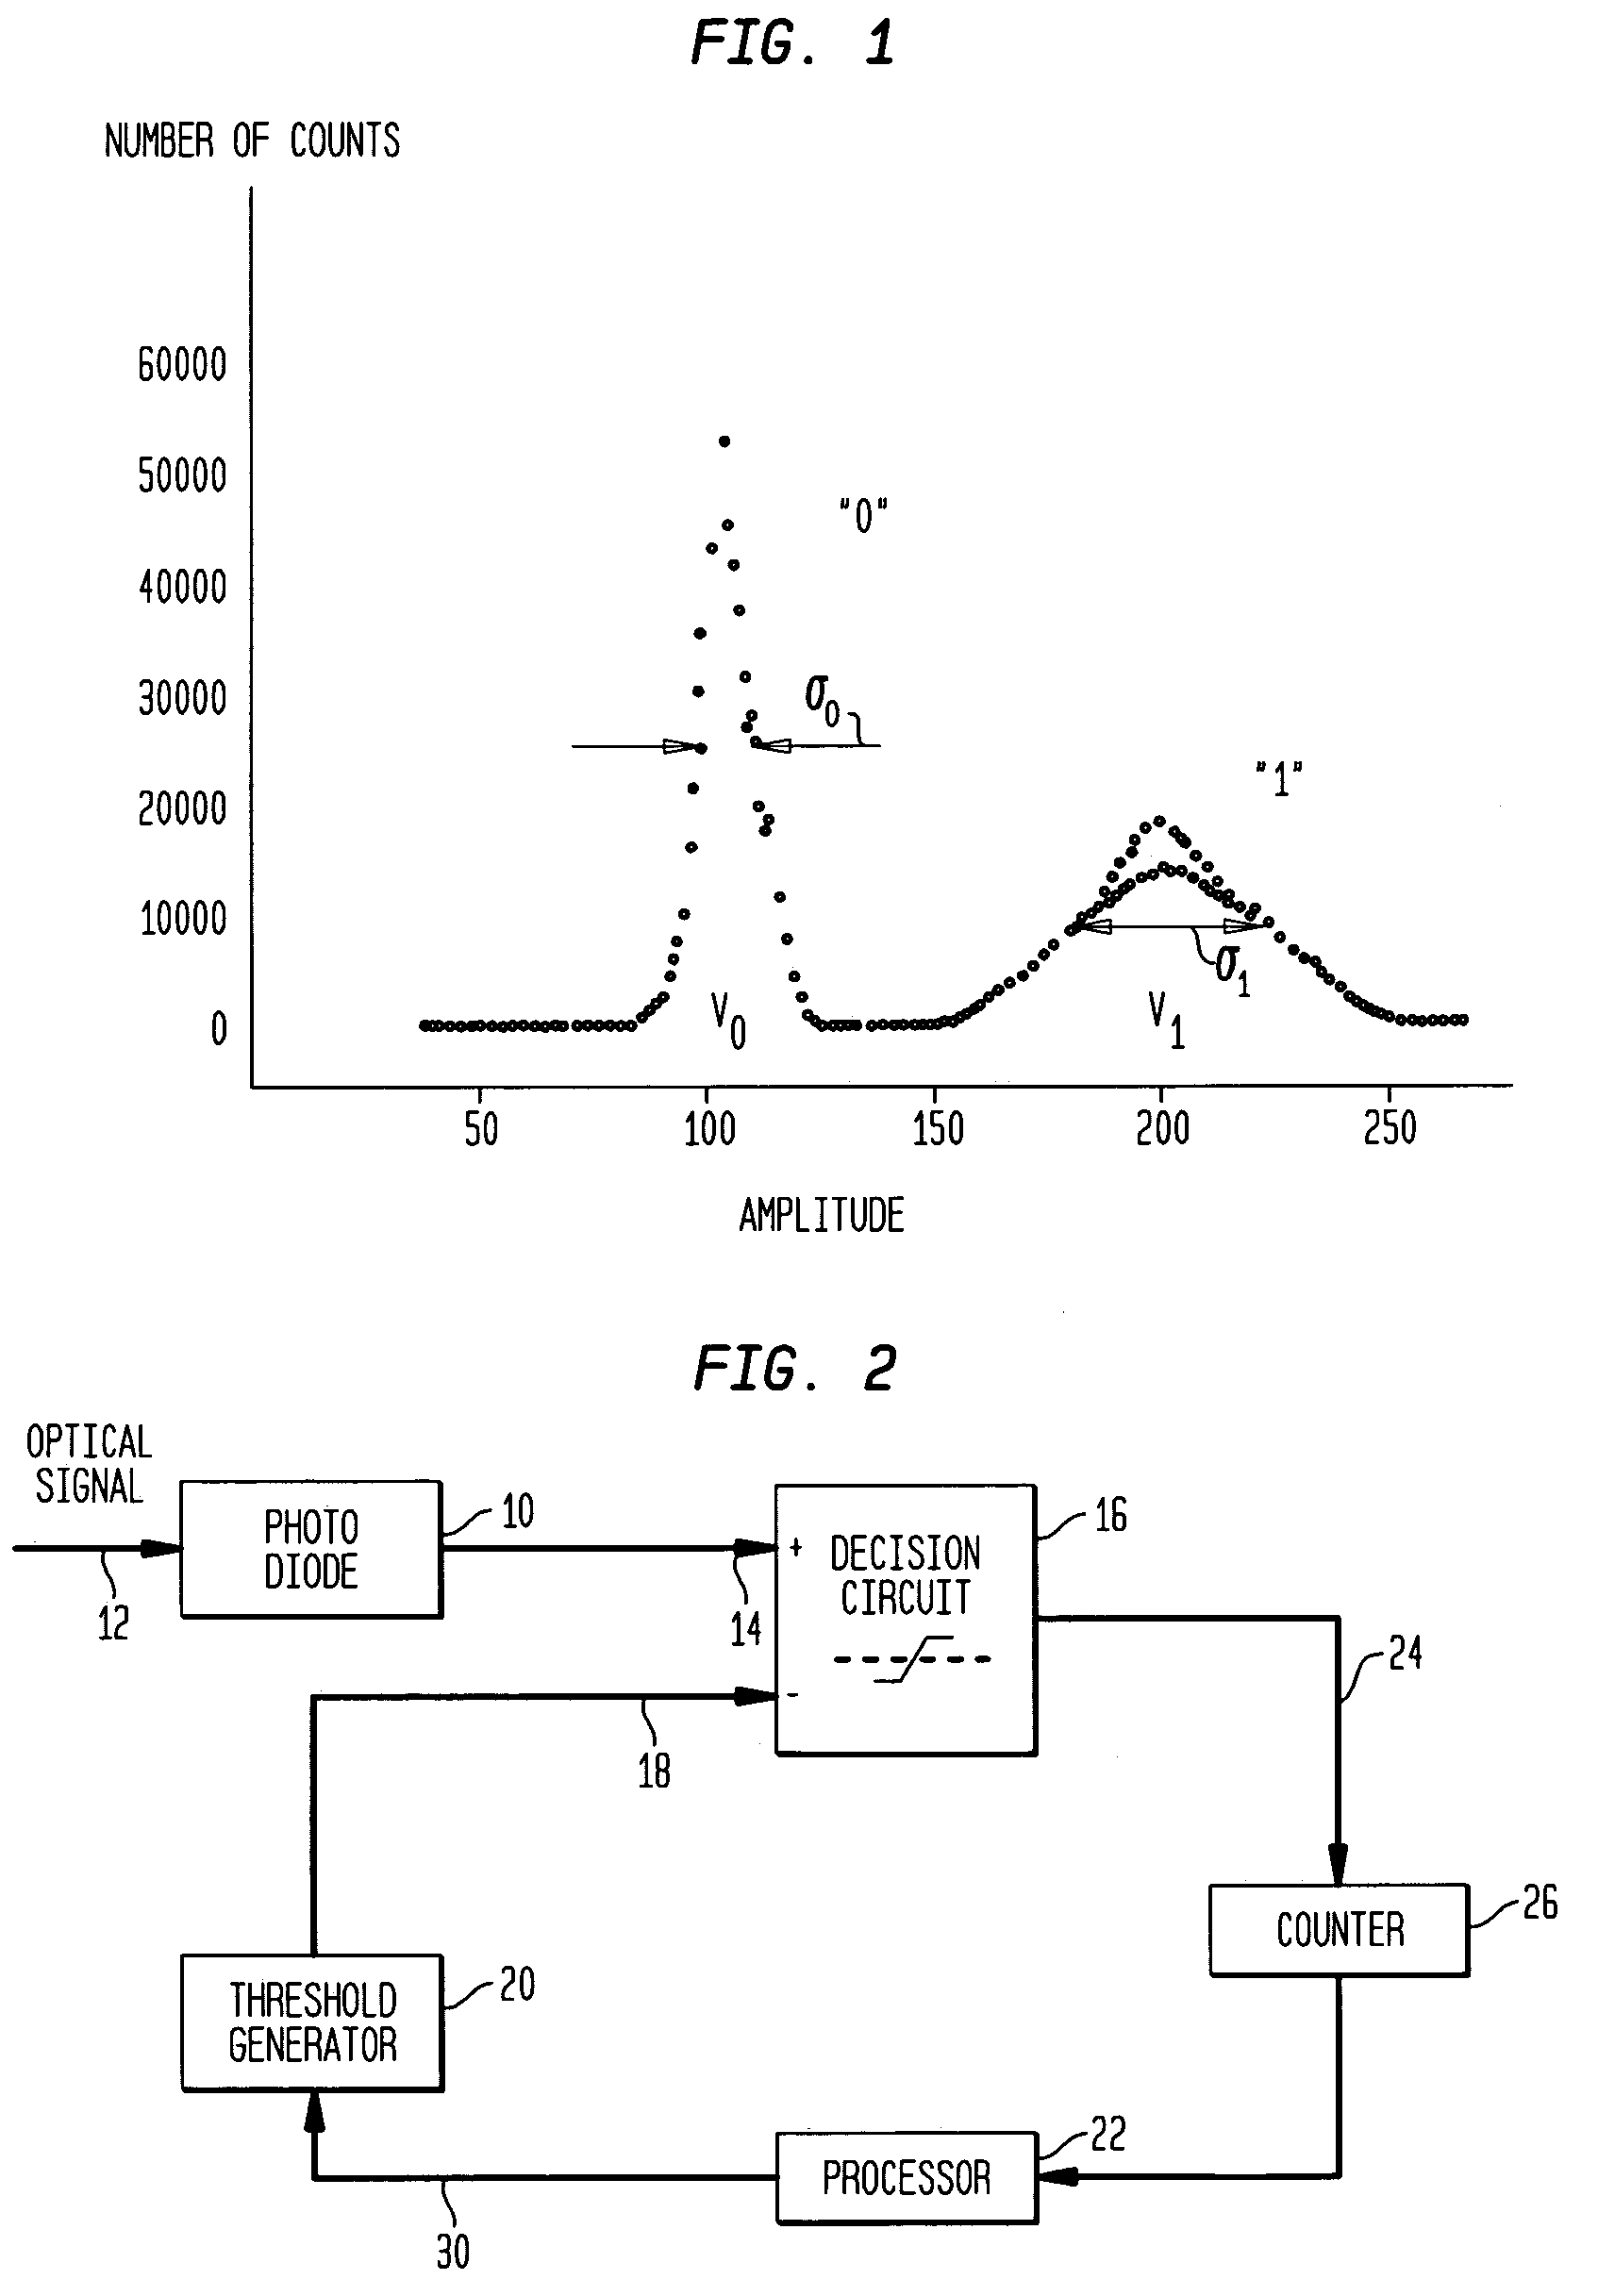 Method and apparatus for optical signal and noise analysis using pulse amplitude histogram